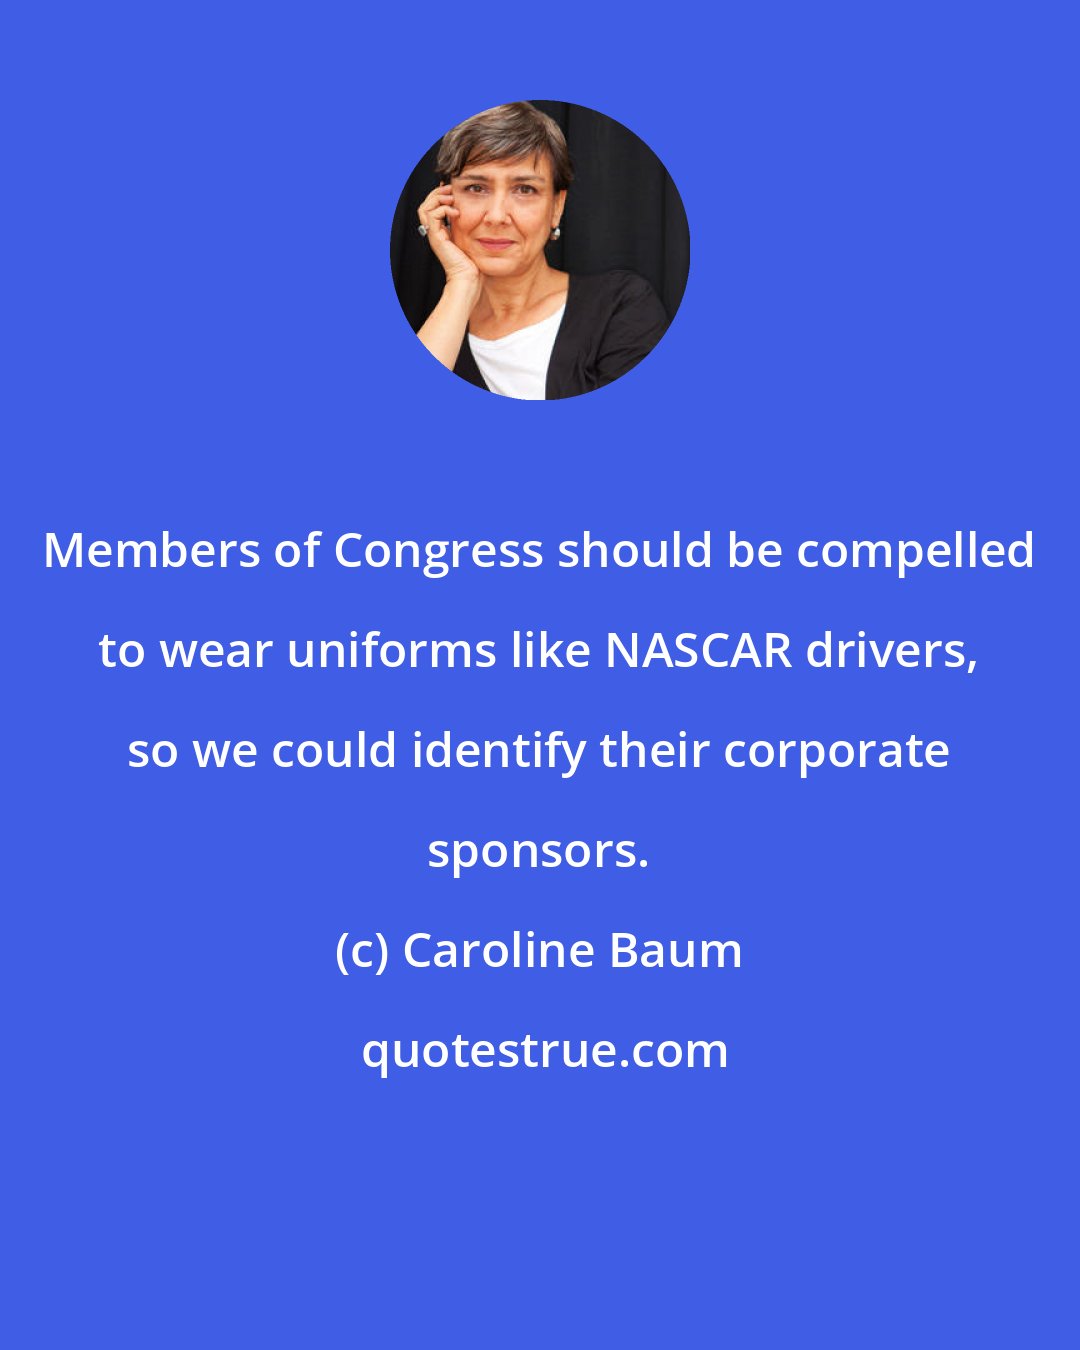 Caroline Baum: Members of Congress should be compelled to wear uniforms like NASCAR drivers, so we could identify their corporate sponsors.